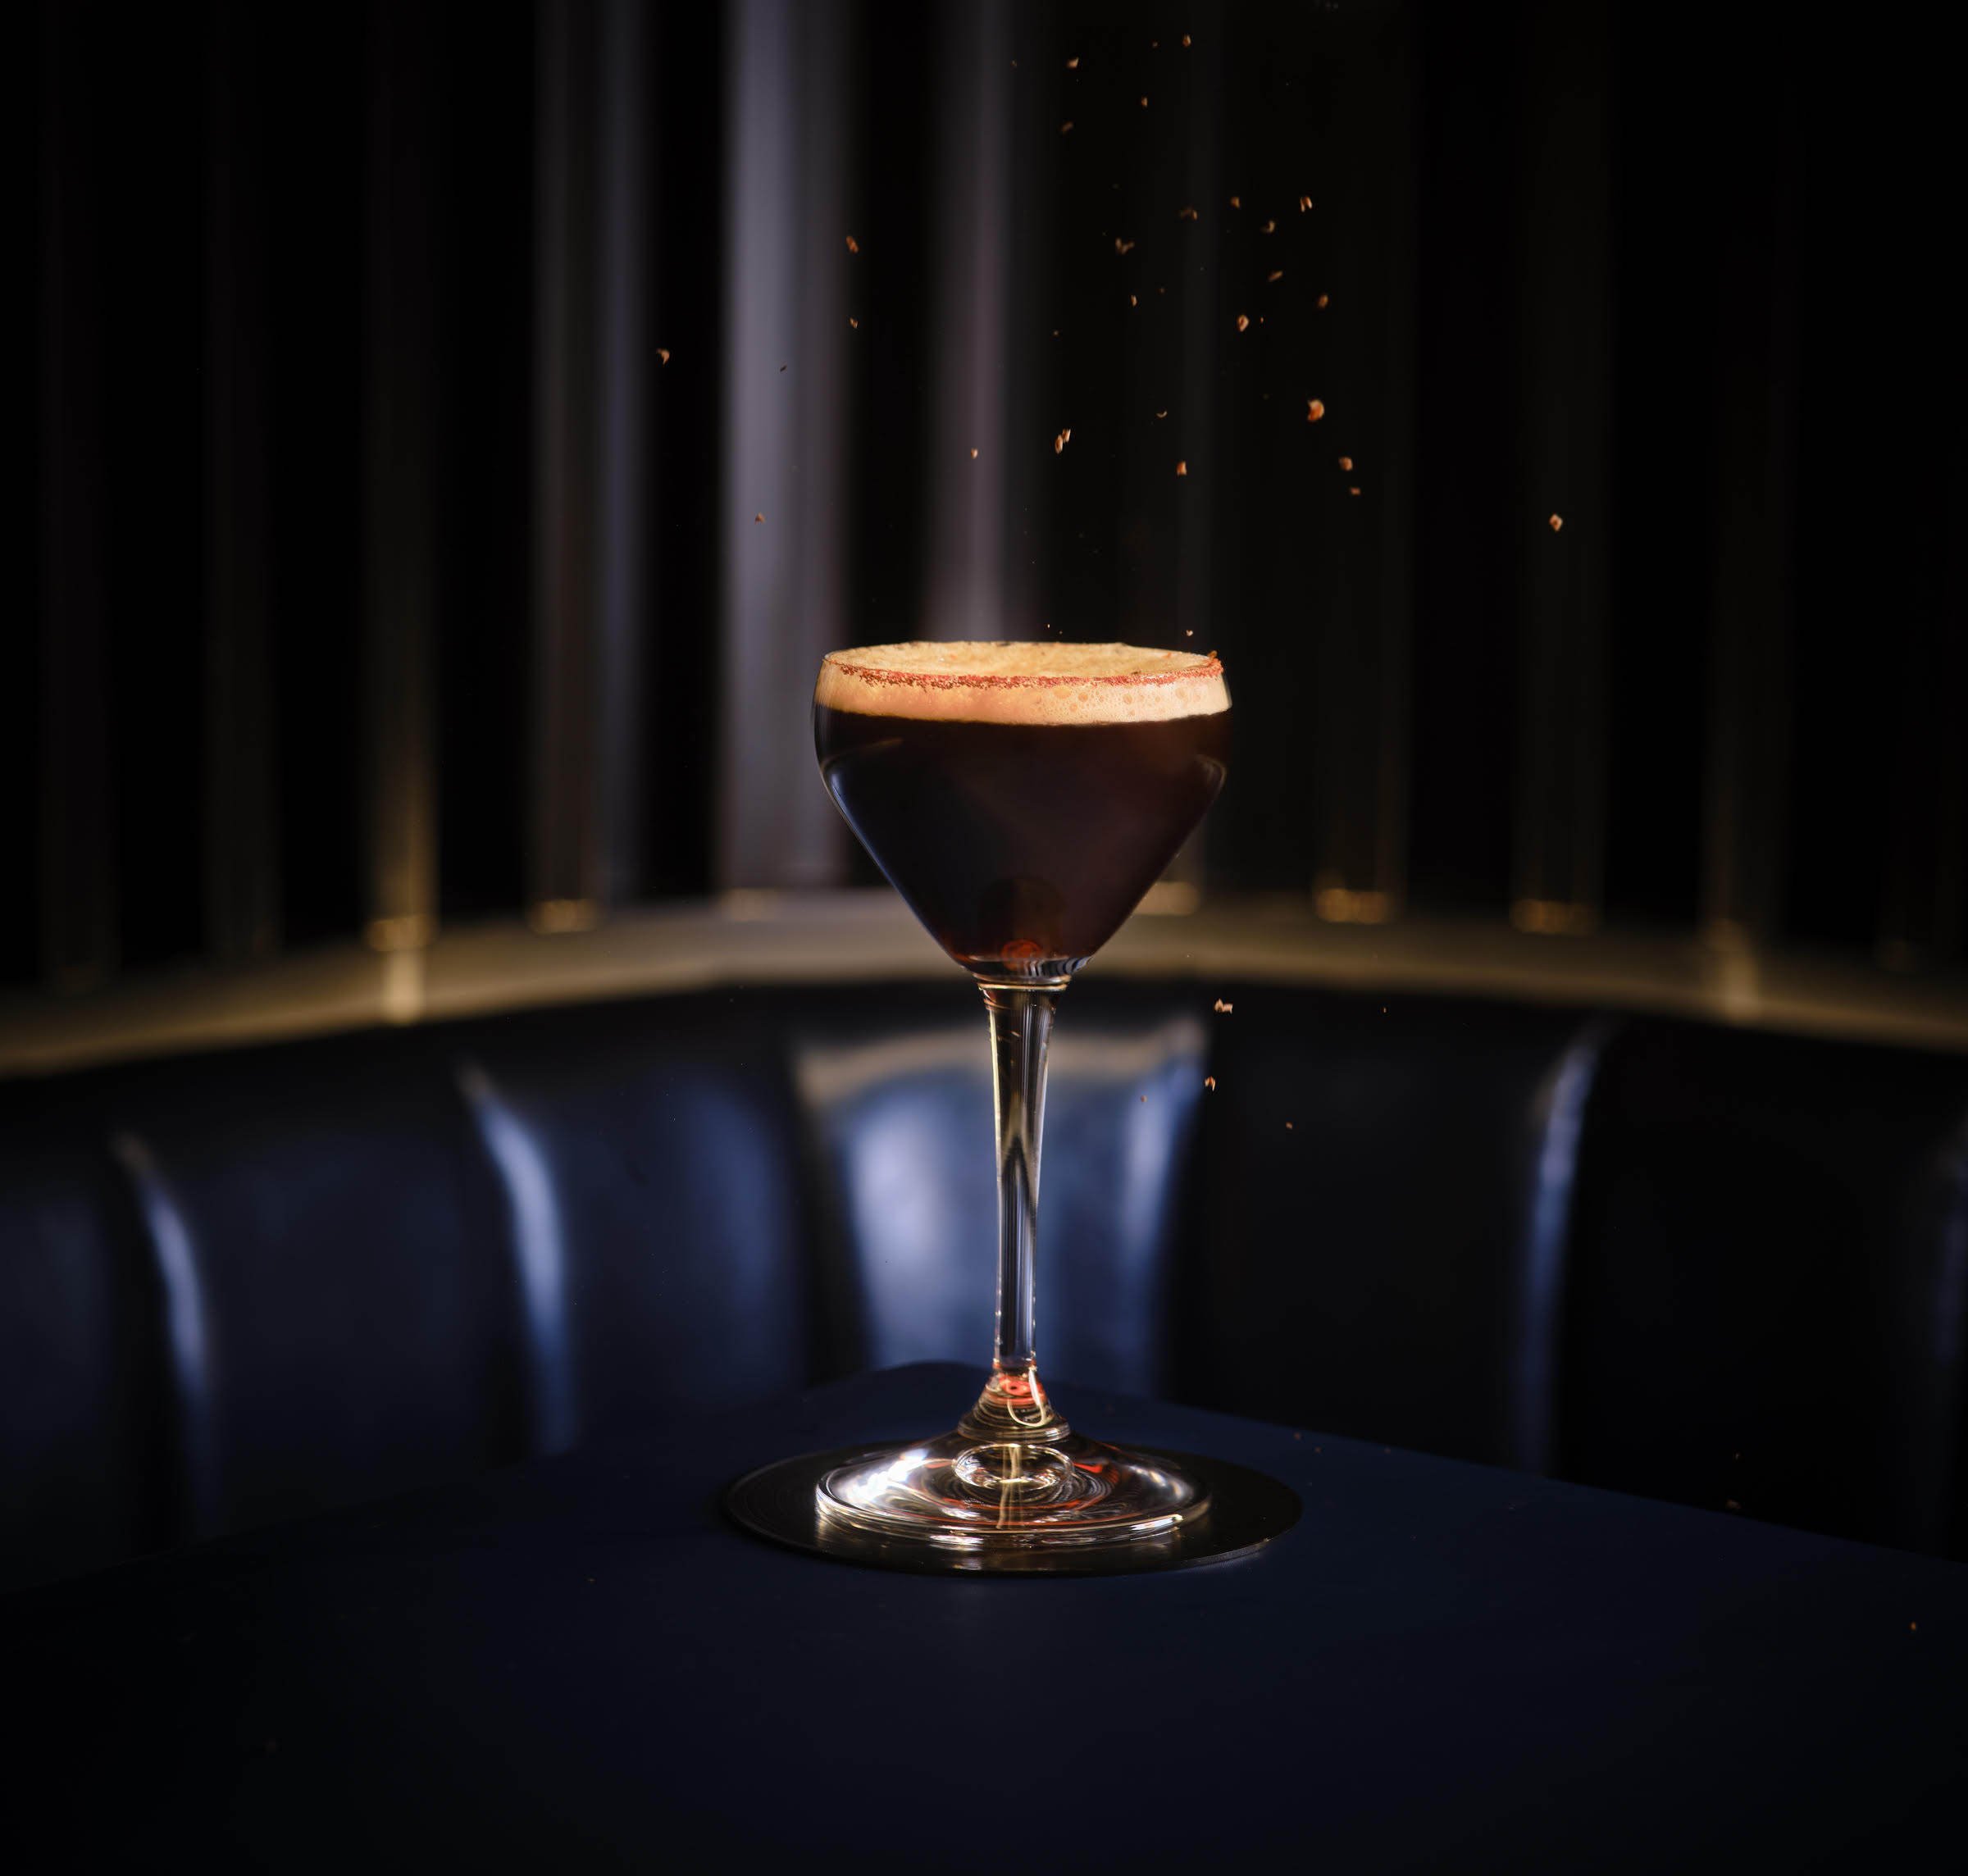 Wake Up - Inspired by Rage Against The Machine’s 1991 hit, this espresso martini riff comprises beef jerky-washed Wild Turkey Rye, espresso, coffee liqueur, kokuto syrup, and is garnished with shrimp roe and tonka beans. Photo: Handout